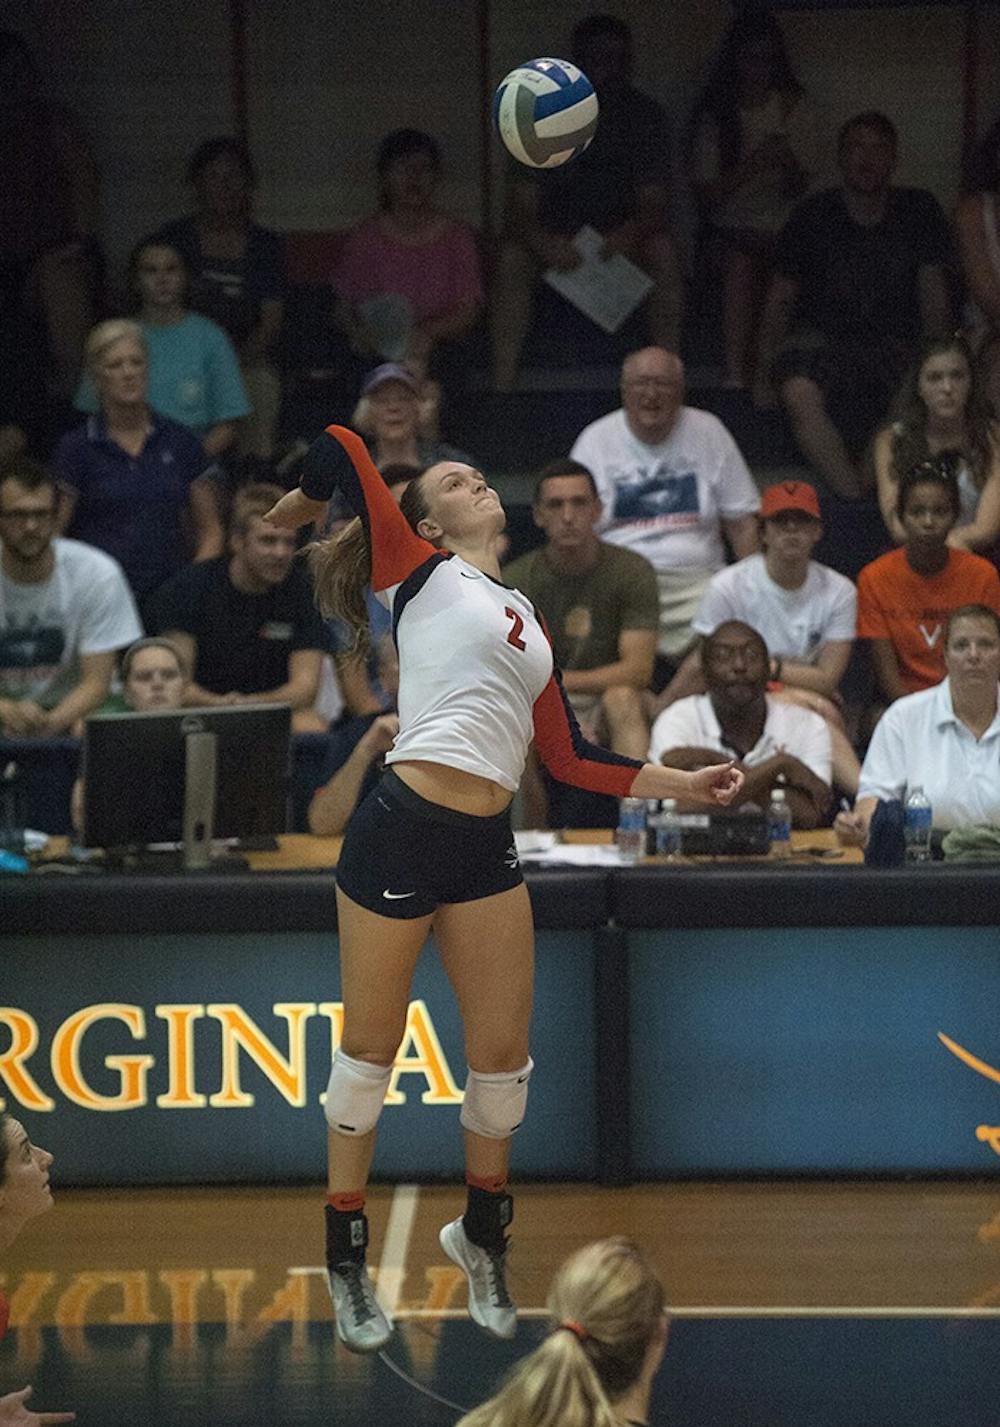 Haley Cole and the Virginia volleyball team continued their skid, dropping both conference matches this weekend at home.